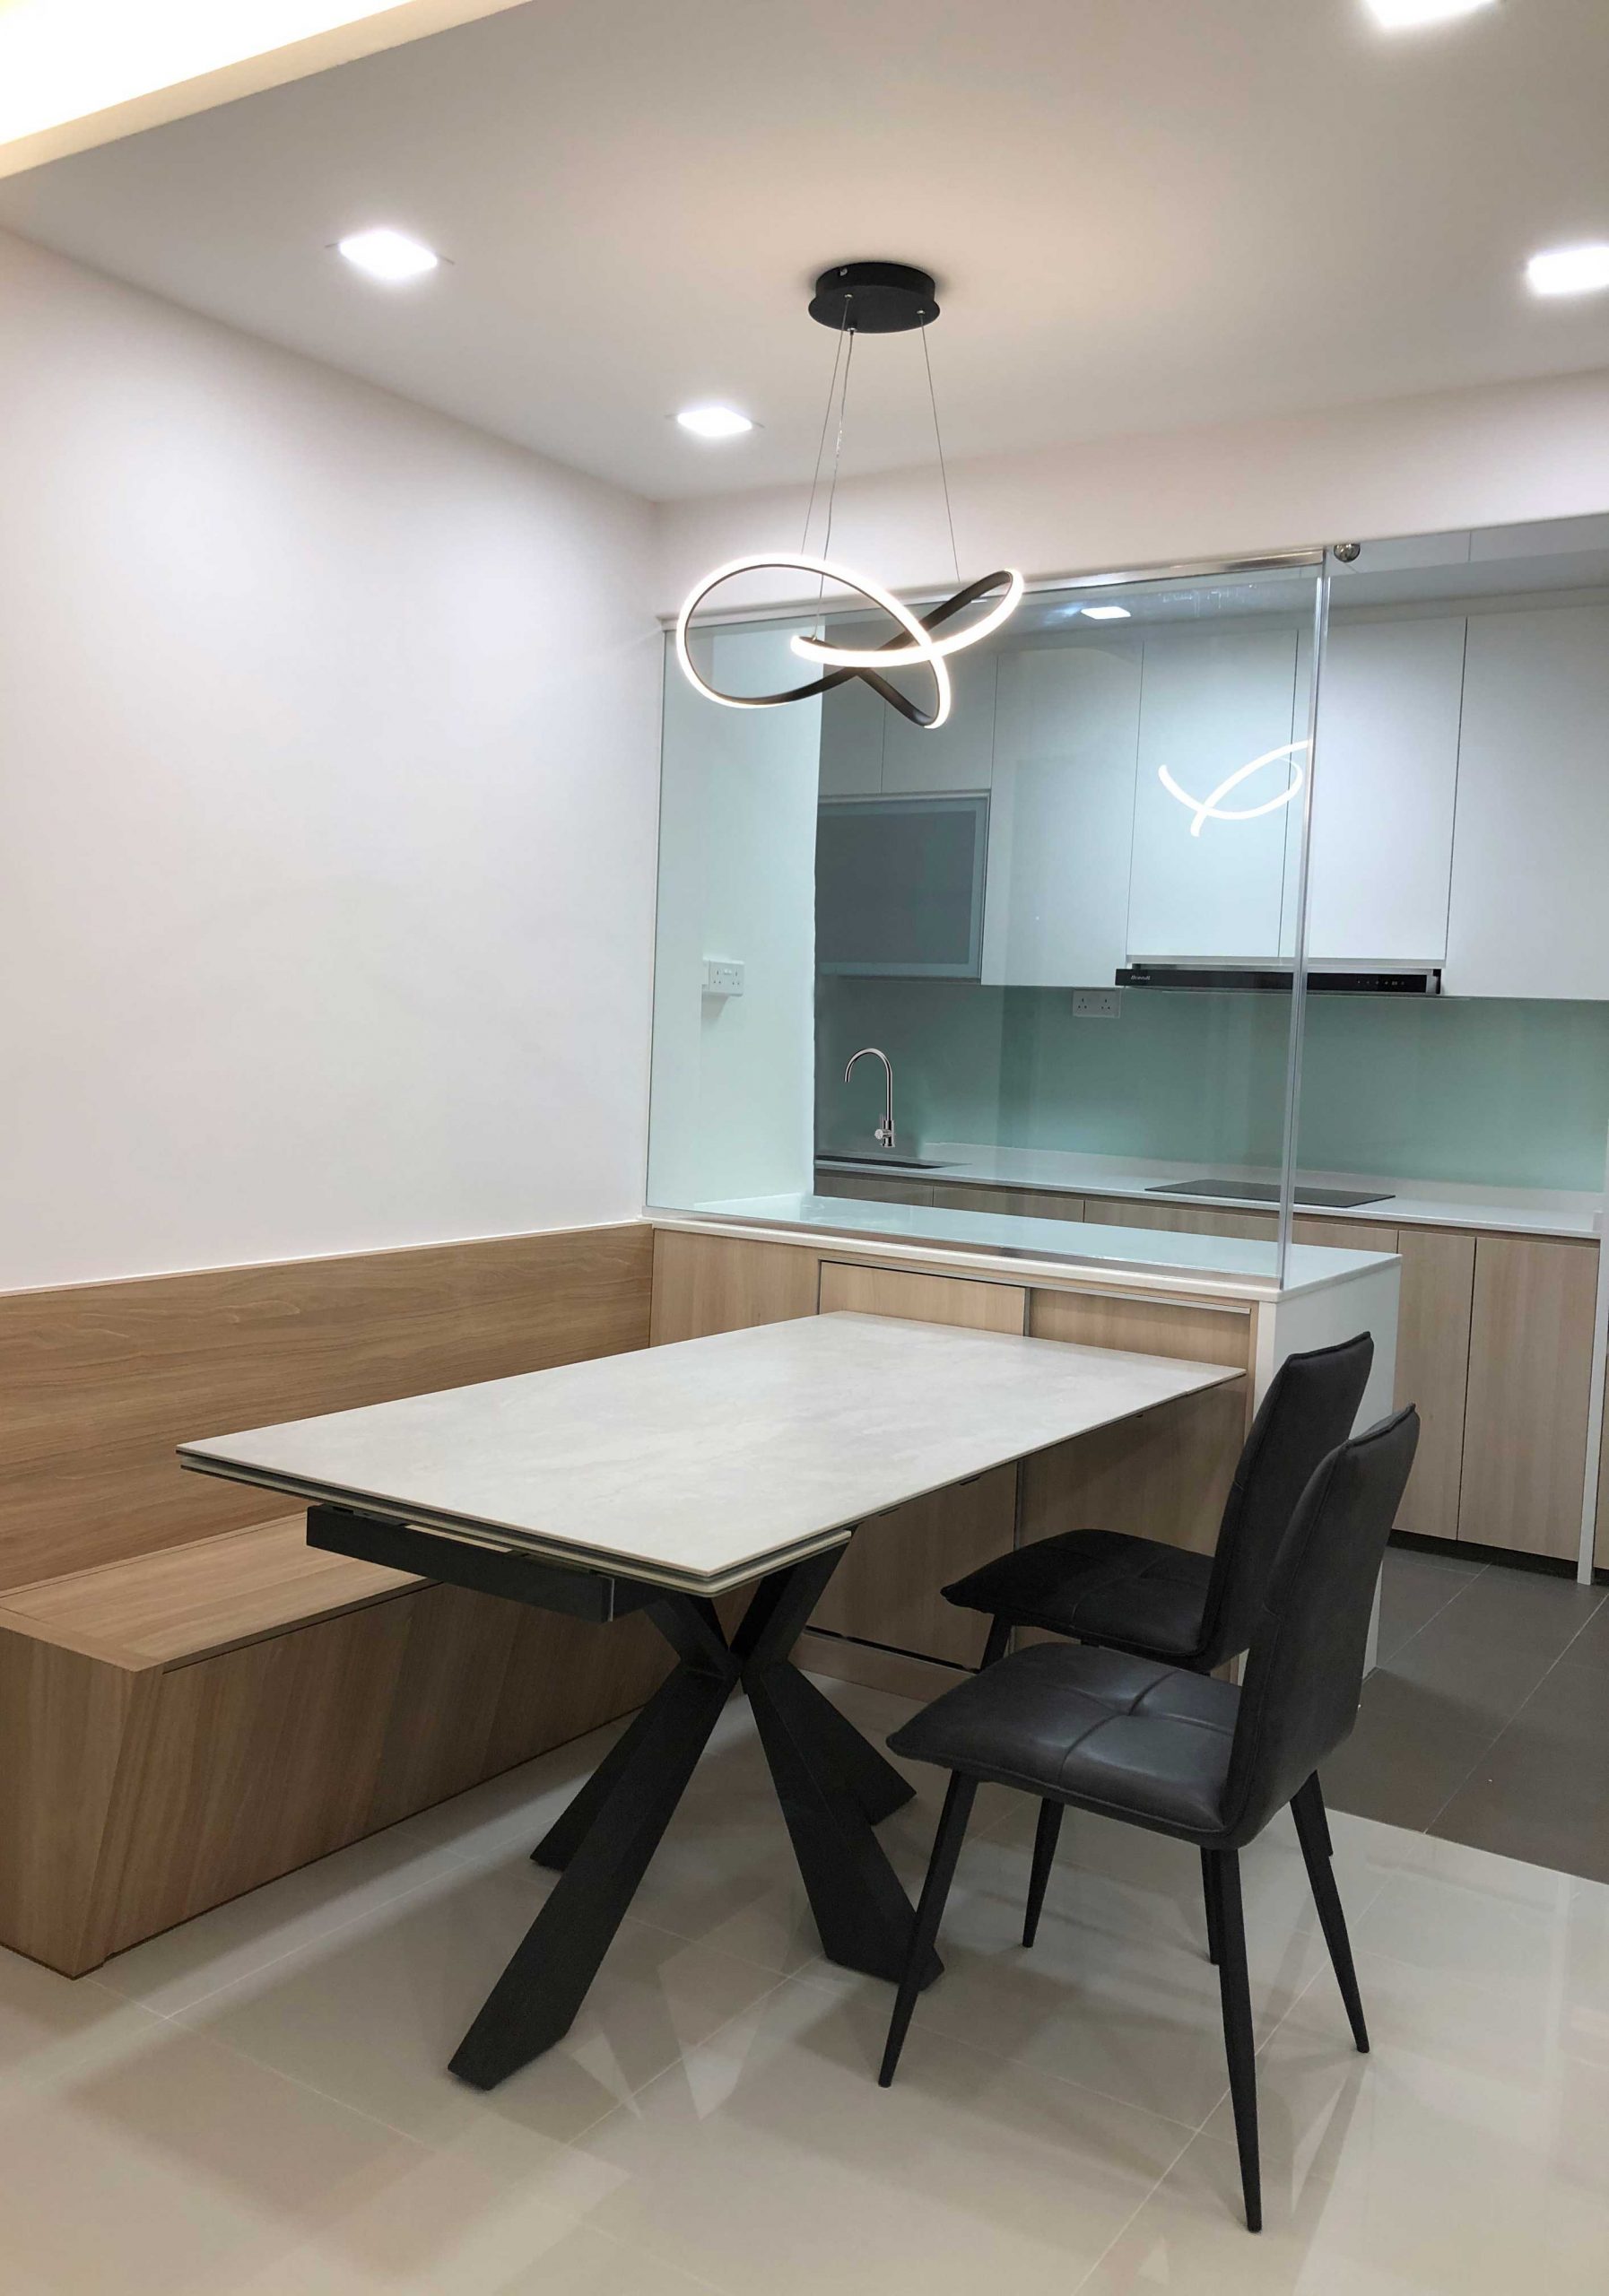 HDB resale design for dining room with built in bench and credenza